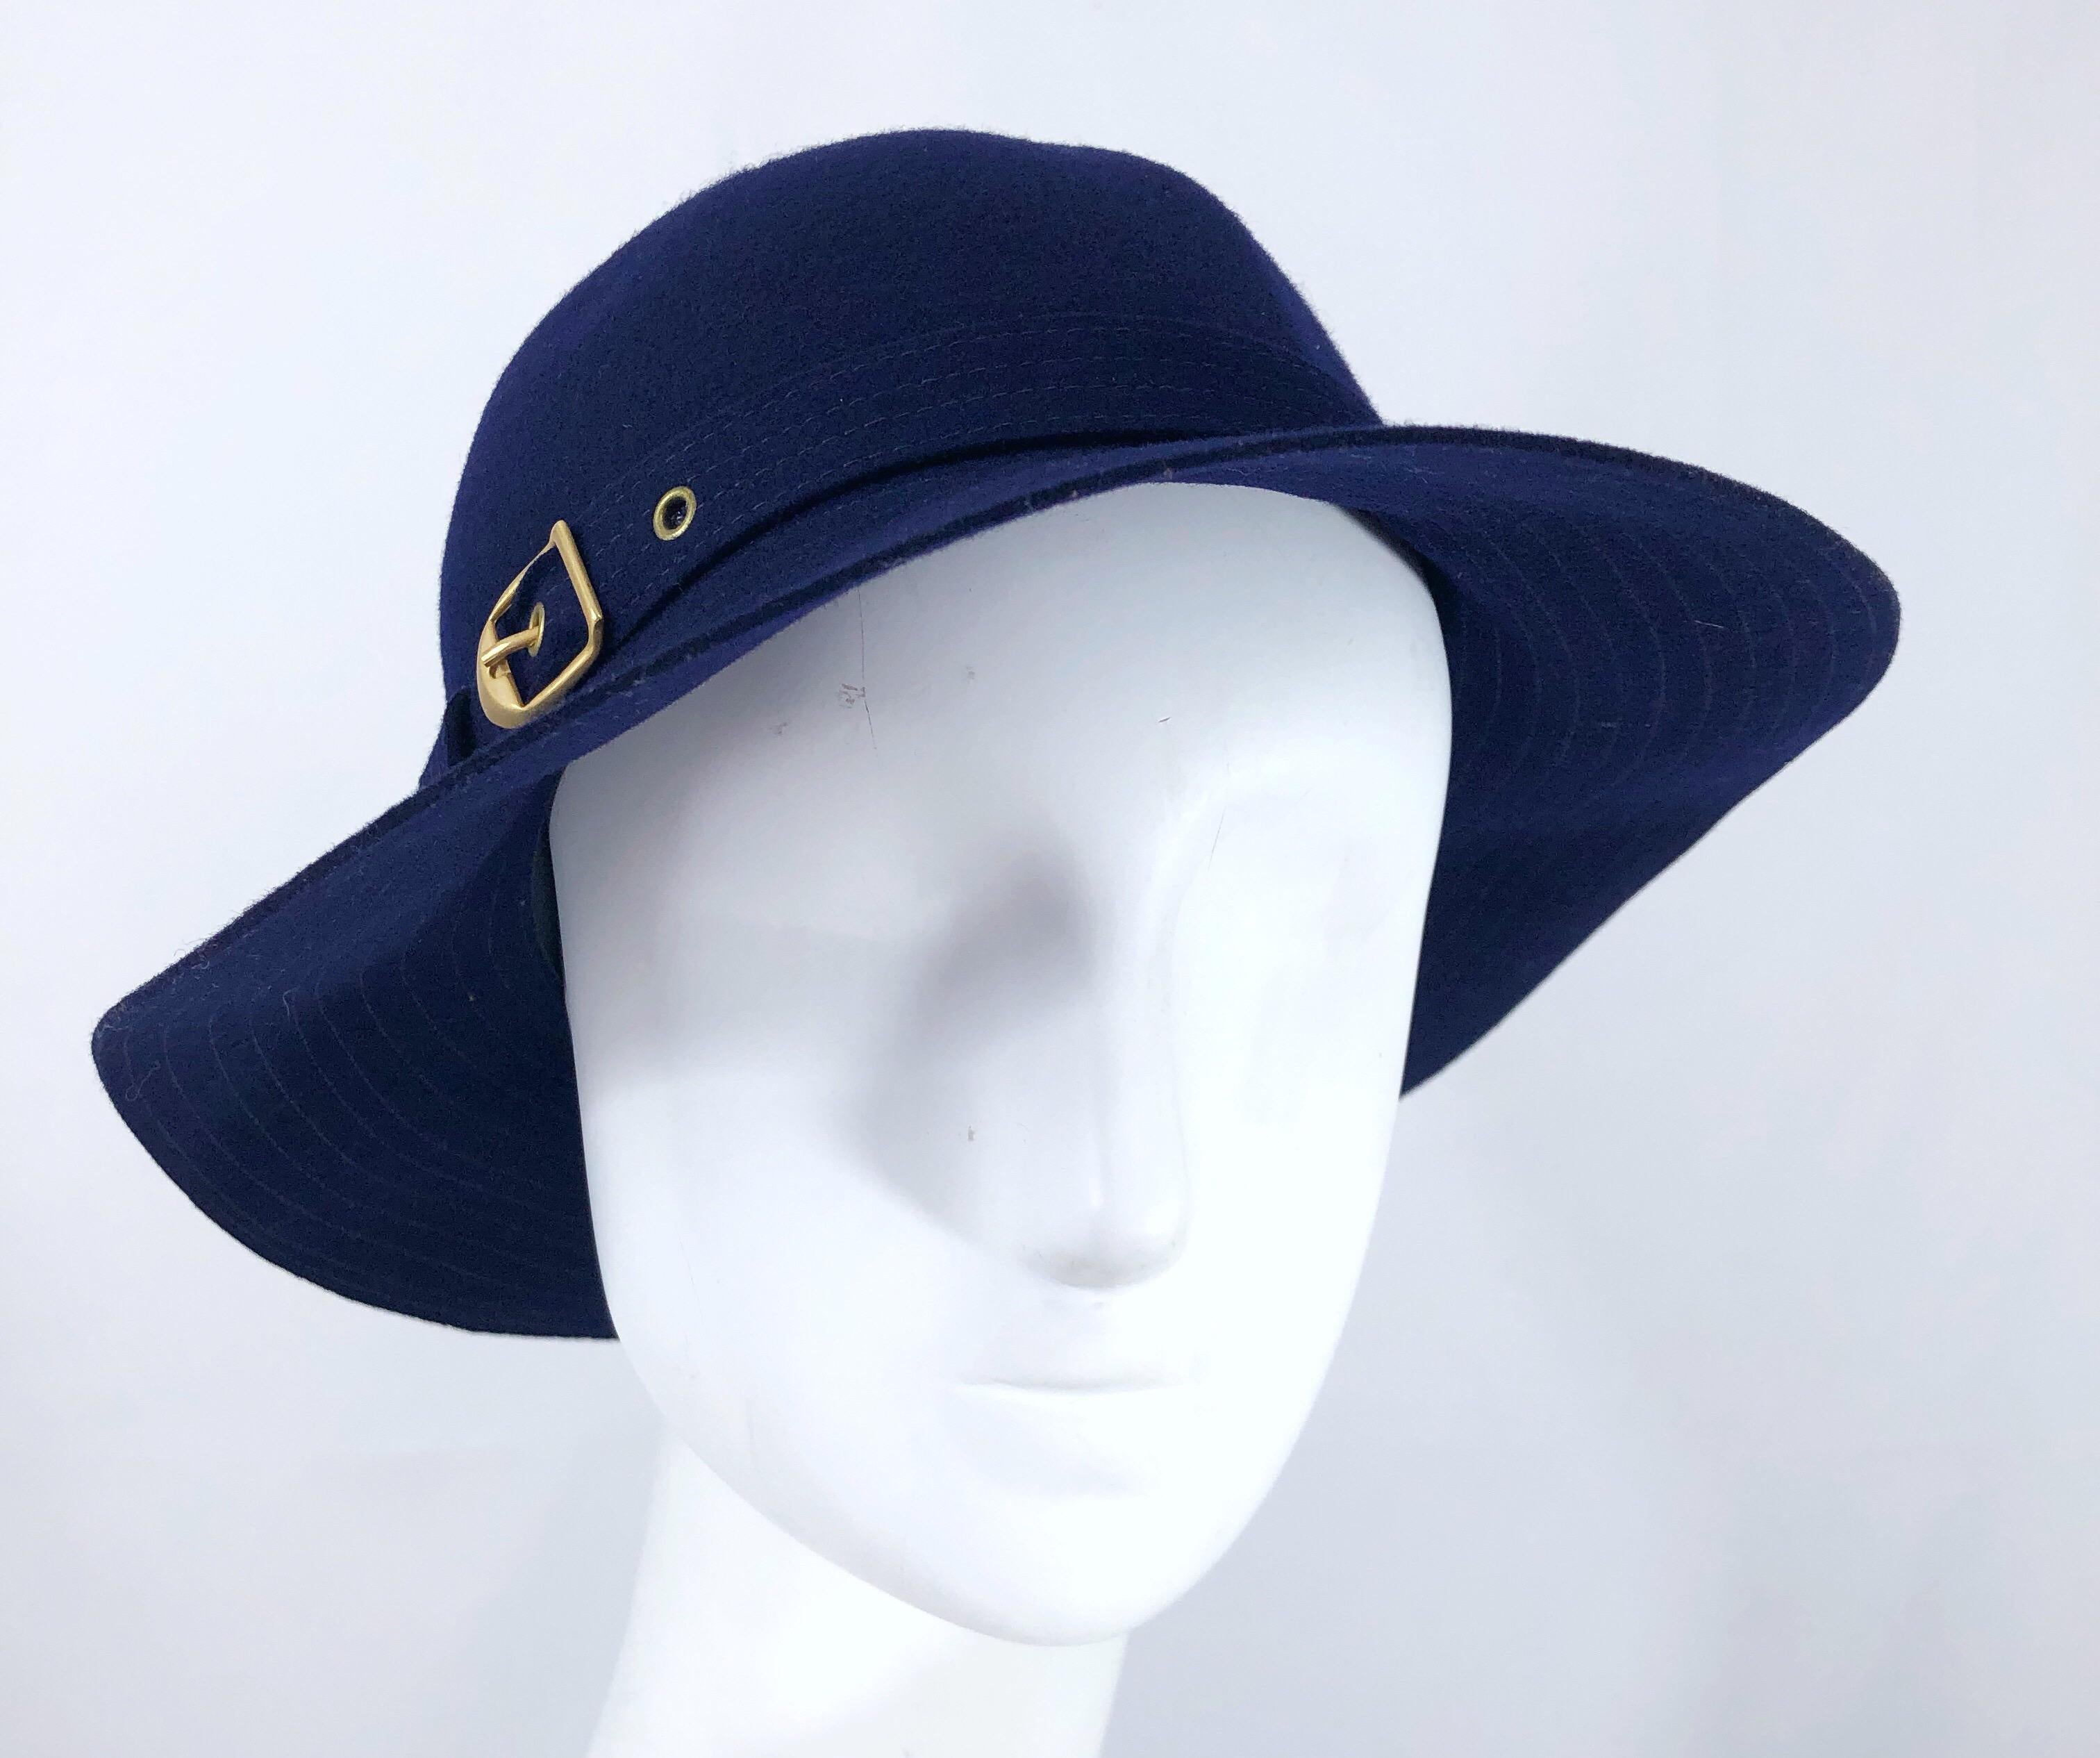 Chic 1970s HALSTON navy blue wool hat! Soft navy blue wool with a gold buckle on the side. The perfect stylish addition to any outfit. In great condition. Made in USA
Will fit an arrray of sizes because of stretch
Measurements:
9 inches from